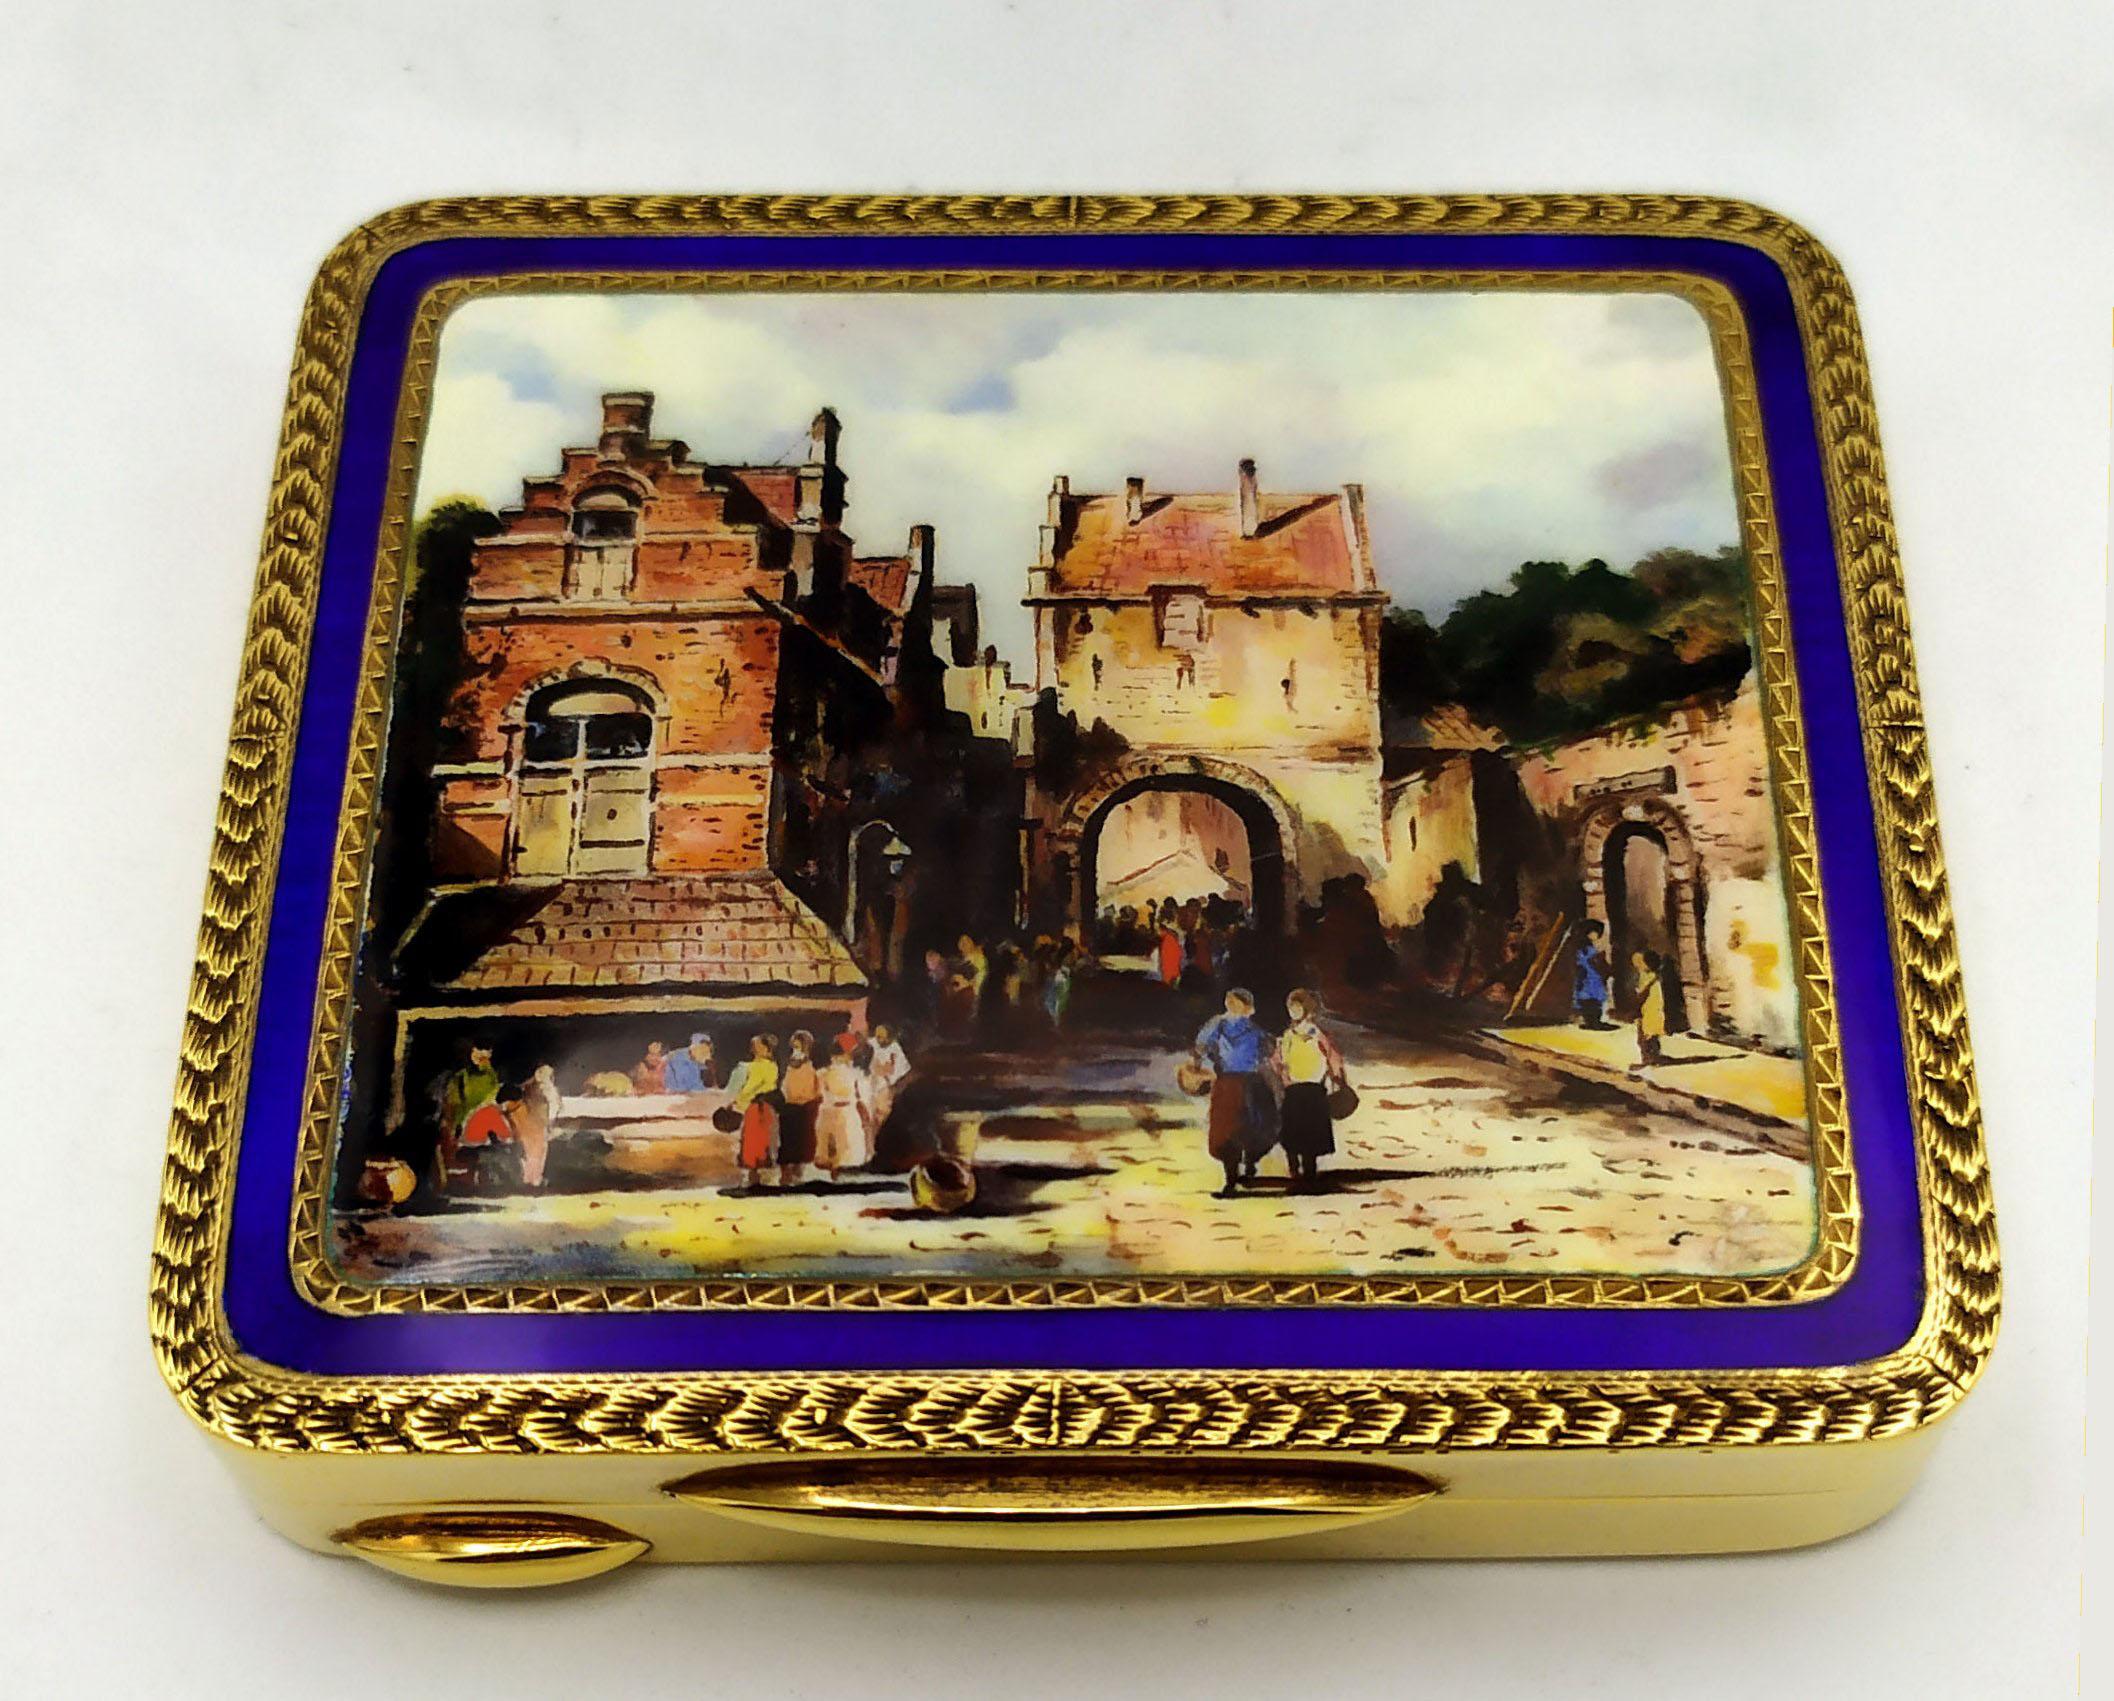 Hand-Carved Snuff Box reproducing the painting of a Roman glimpse late 1800s Salimbeni For Sale